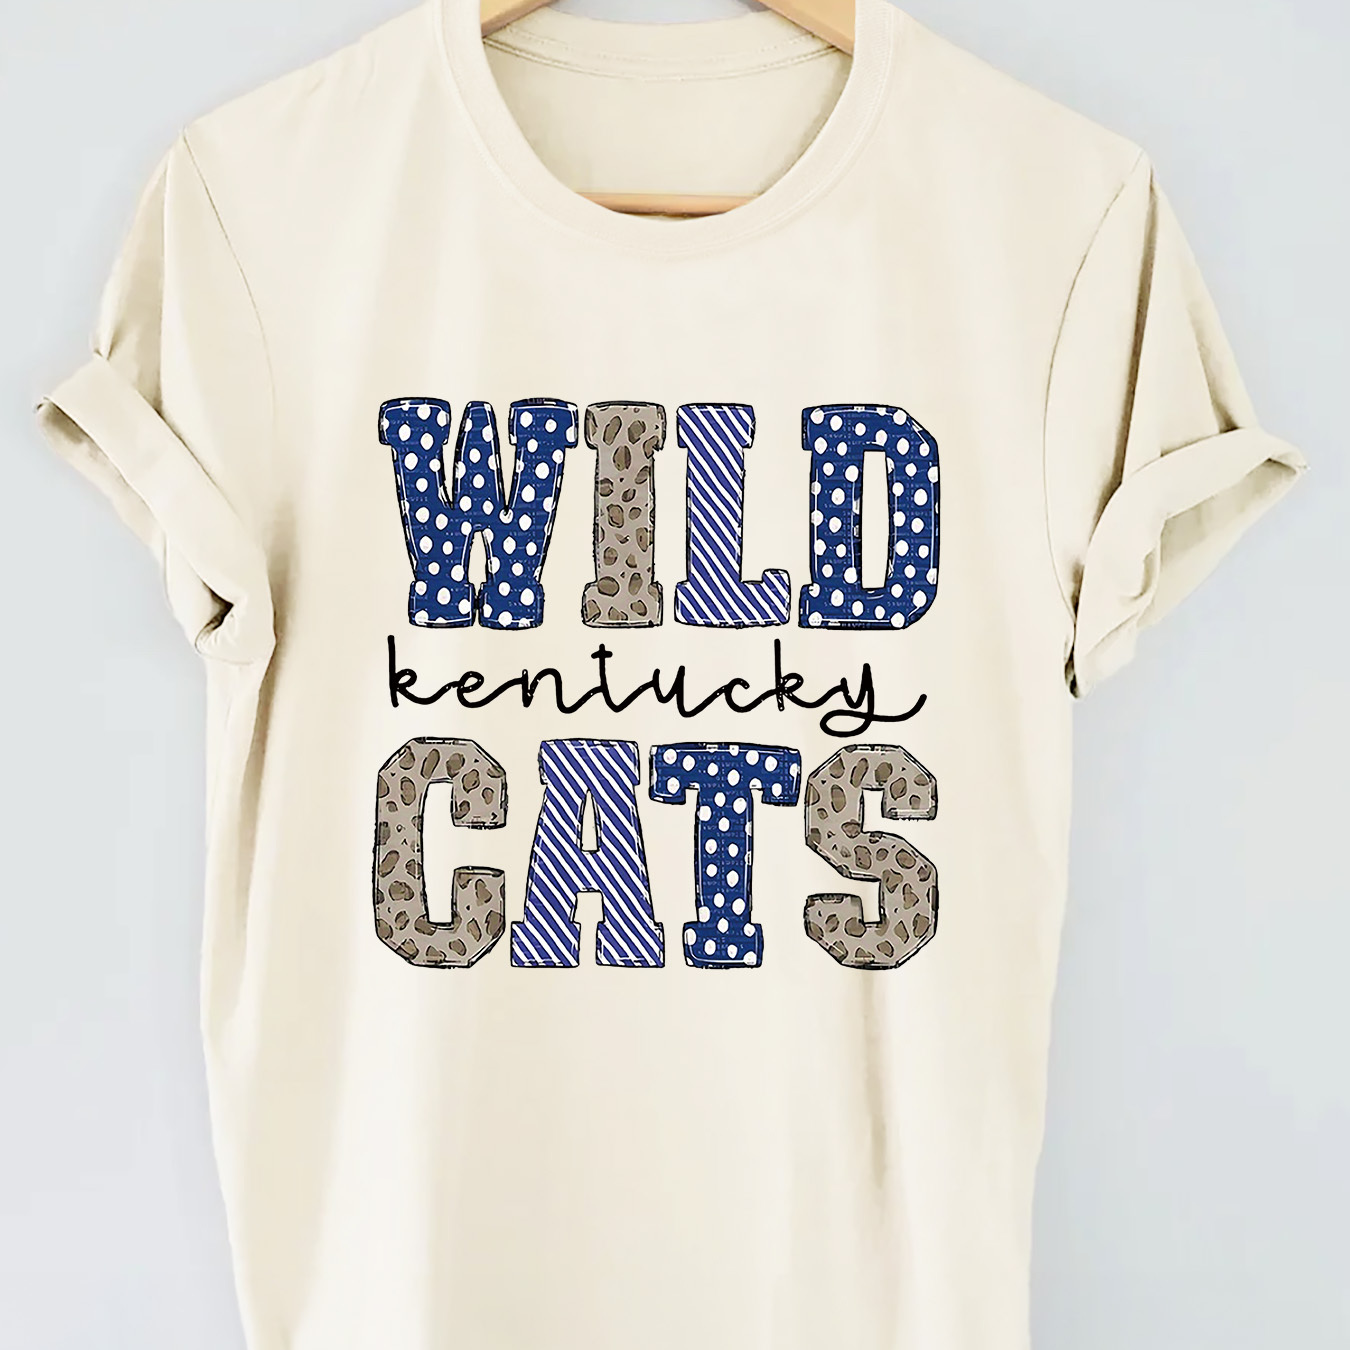 

Wild Cats Letter Print T-shirt, Short Sleeve Crew Neck Casual Top For Summer & Spring, Women's Clothing